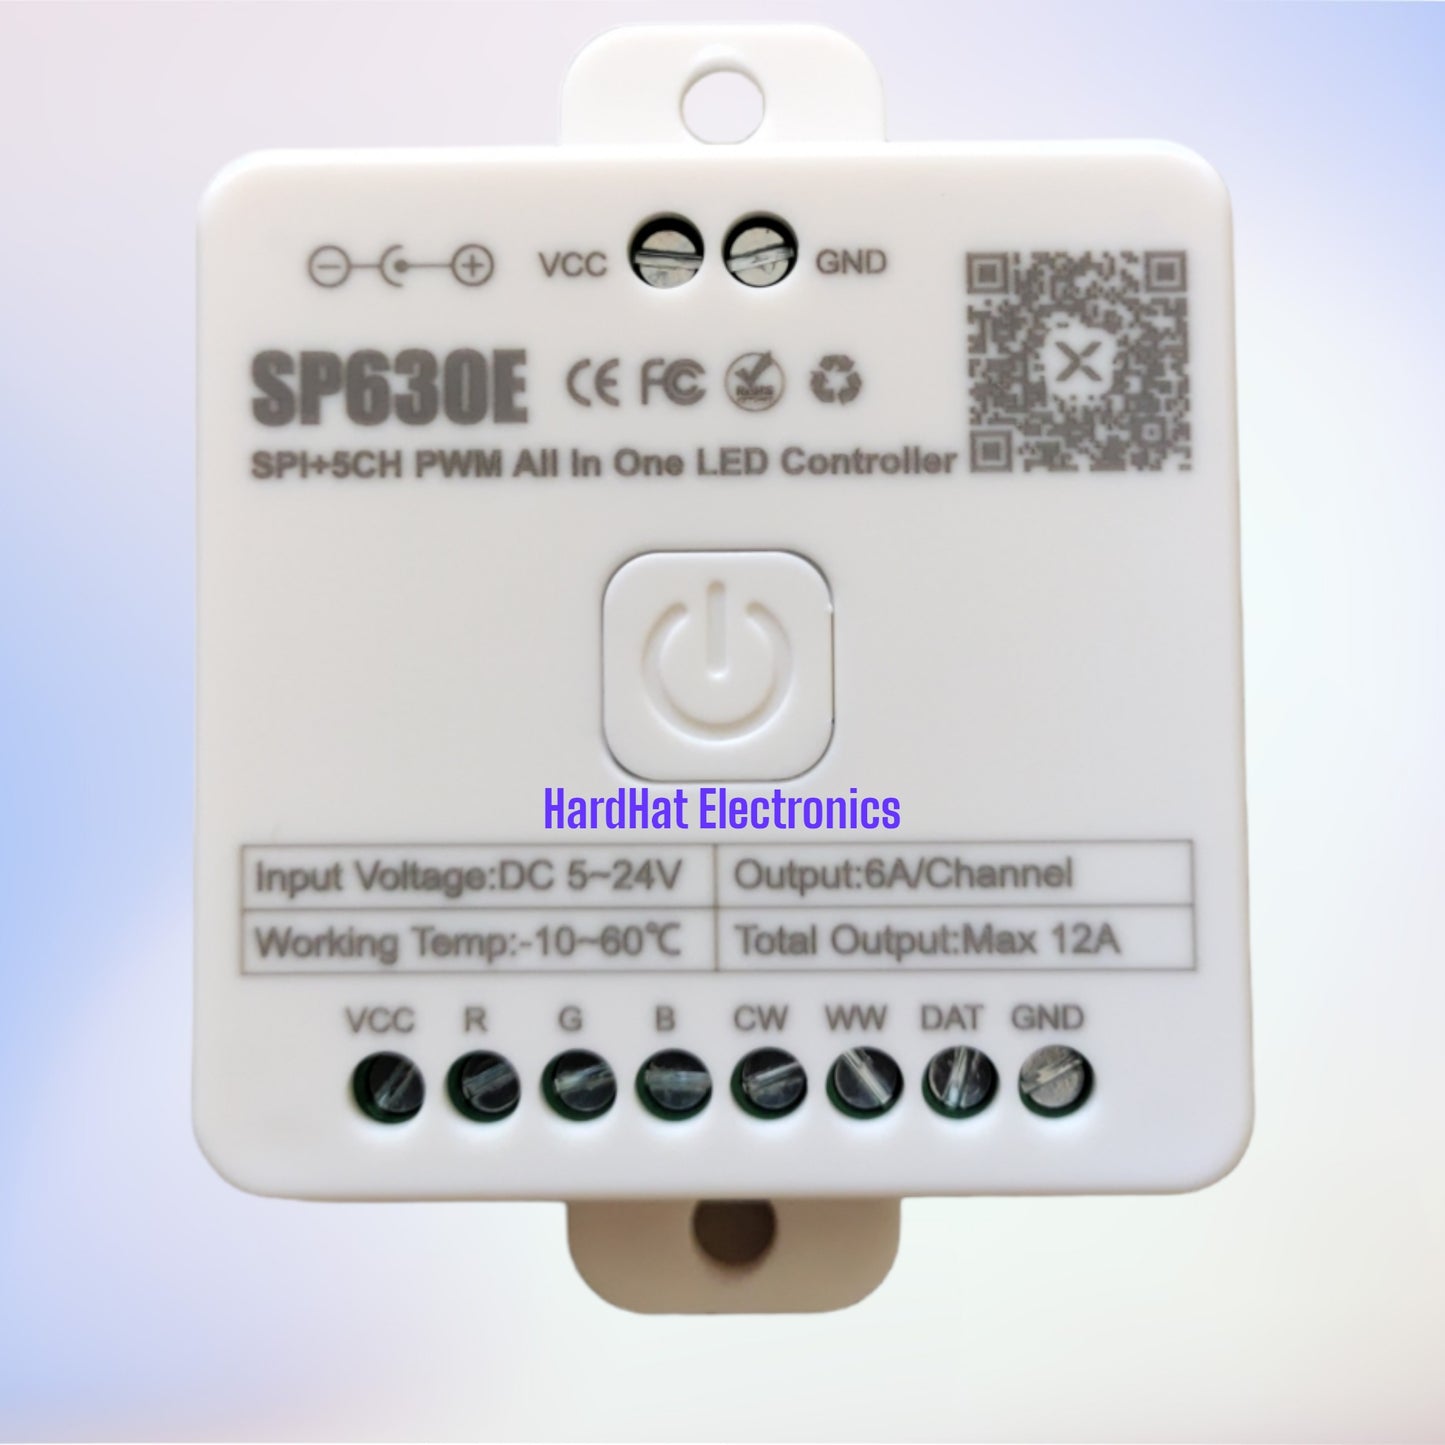 SP630E SPI + 5Ch PWM all in One Led Controller